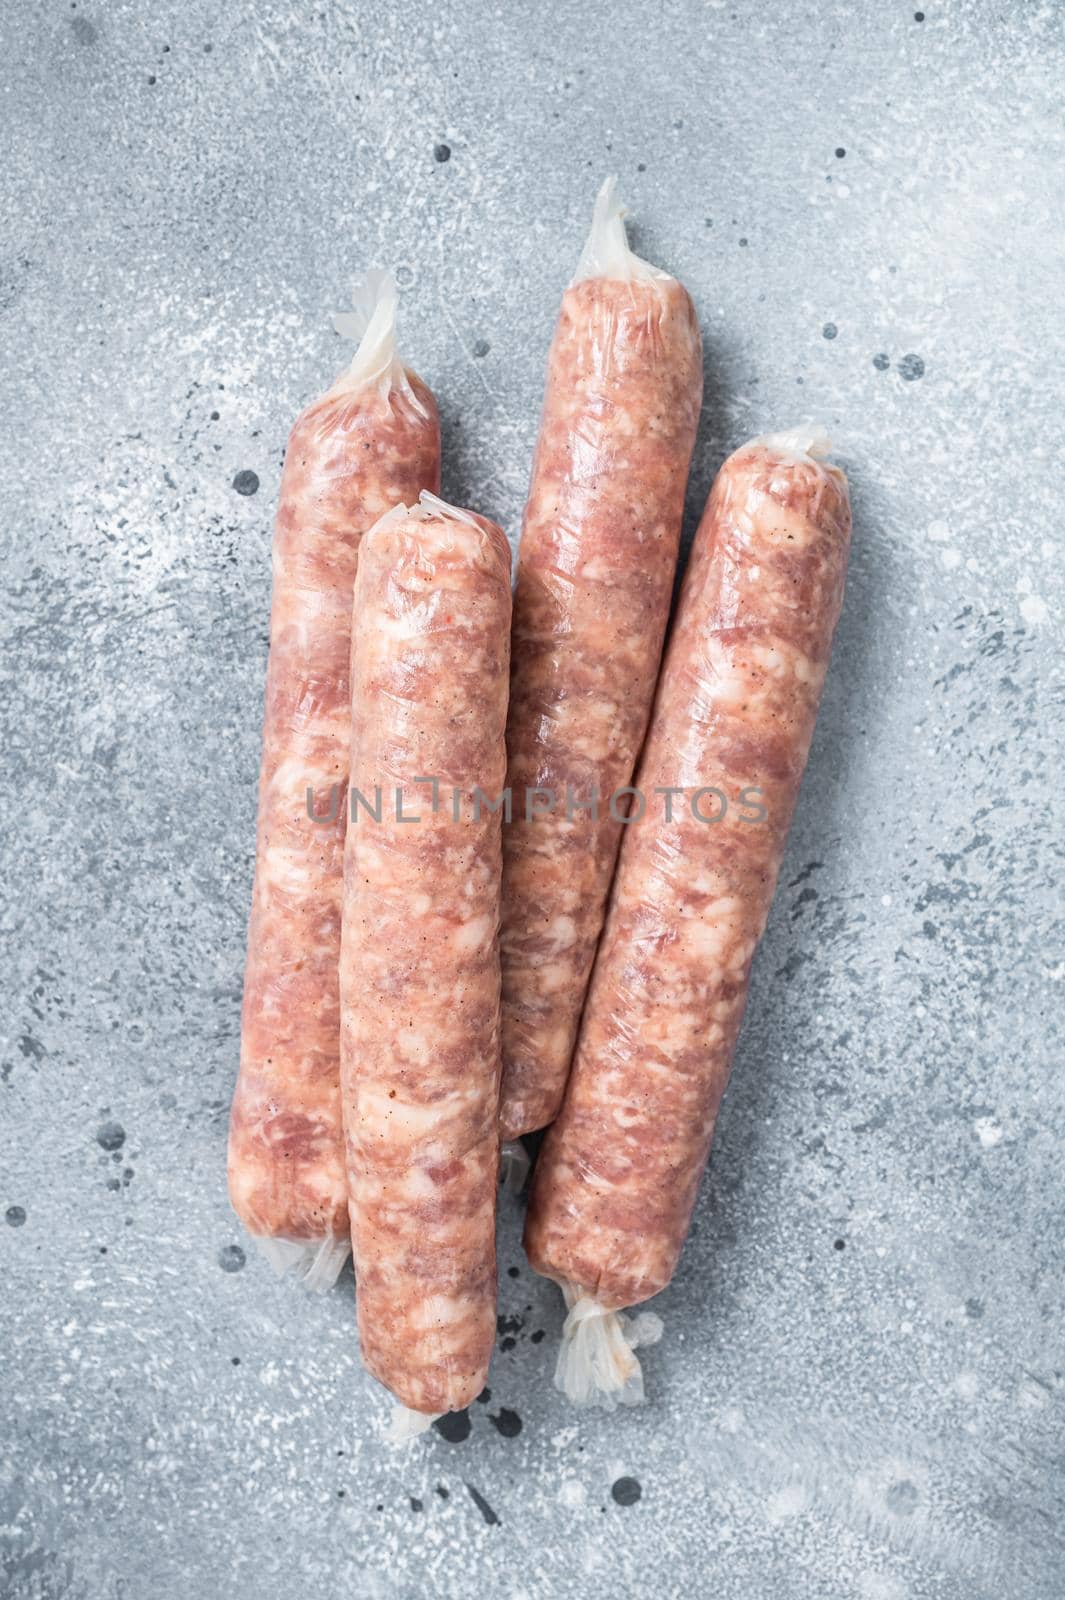 Bratwurst raw sausages on a kitchen table. Gray background. Top view by Composter